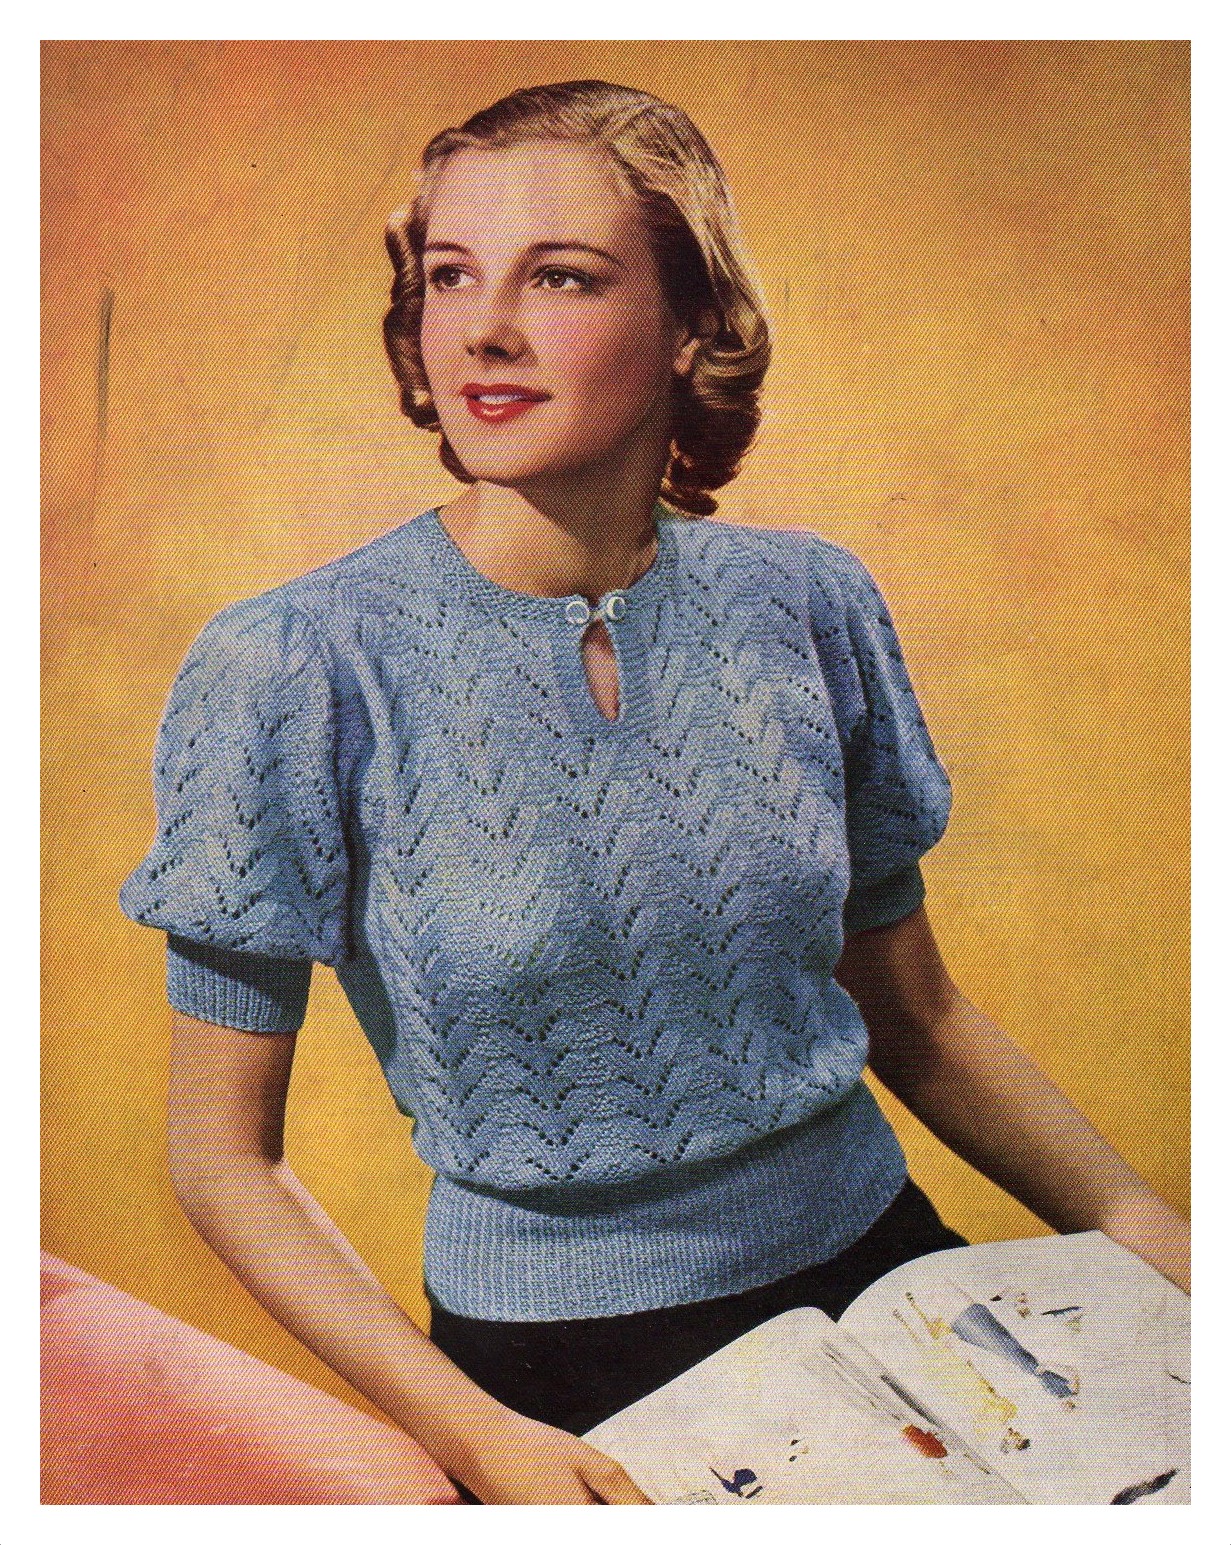 Lady wearing knitted lace work short sleeve sweater that has a leaf like motif.